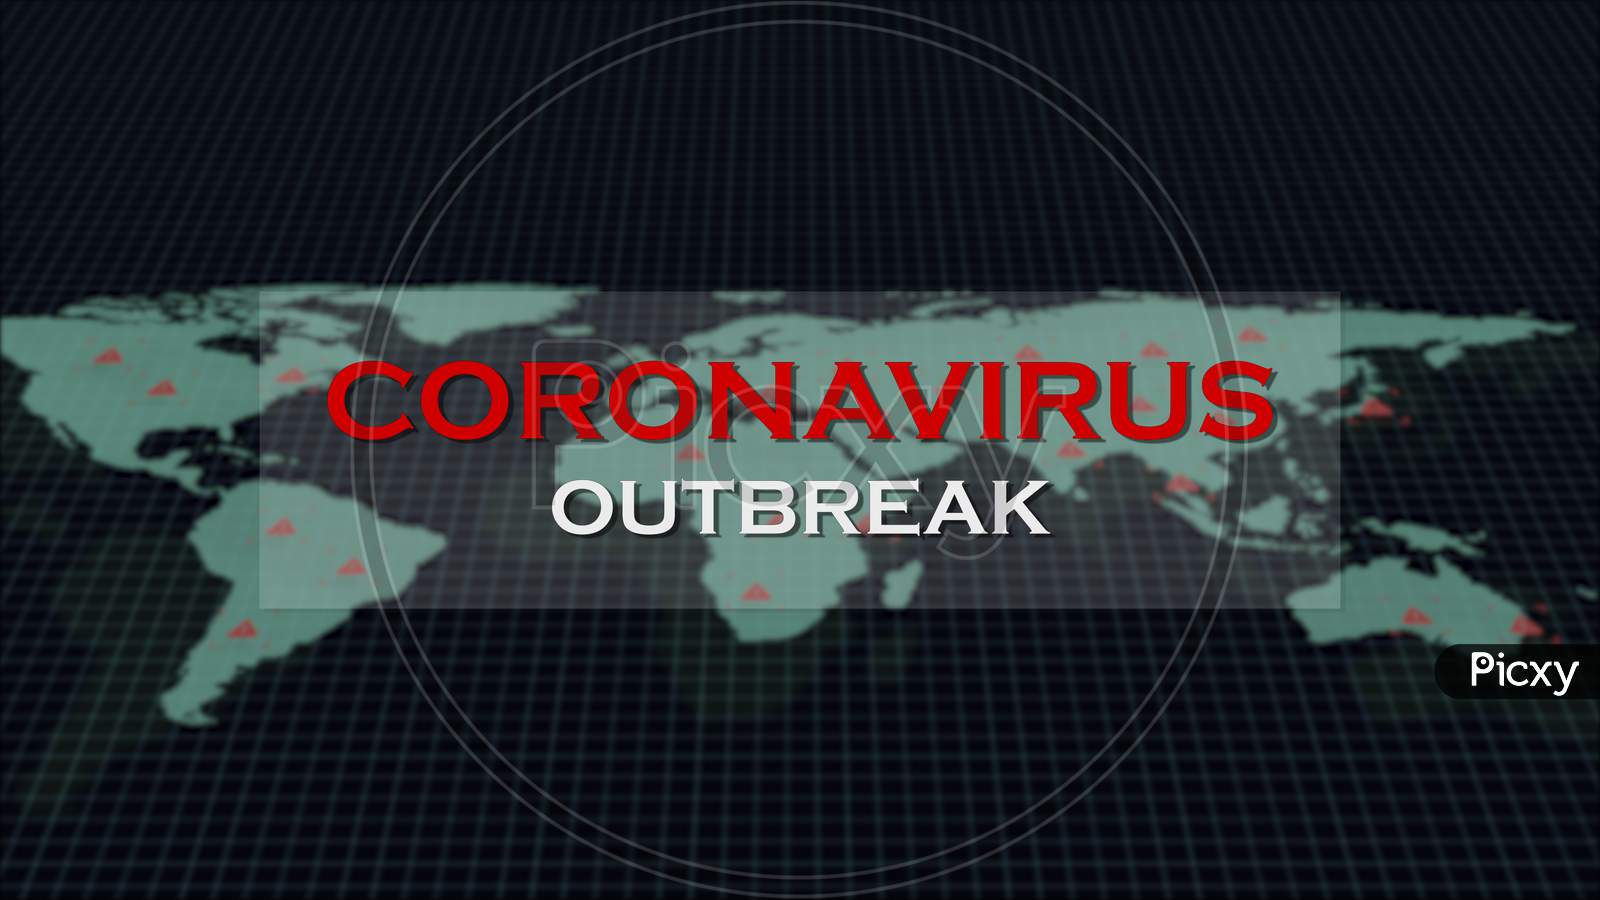 Coronavirus Outbreak Warning Text Message On Global World Map Background On Digital Grid Screen Computer Display. Medical Technology Health Information Communicate Concept. 3D Illustration Rendering